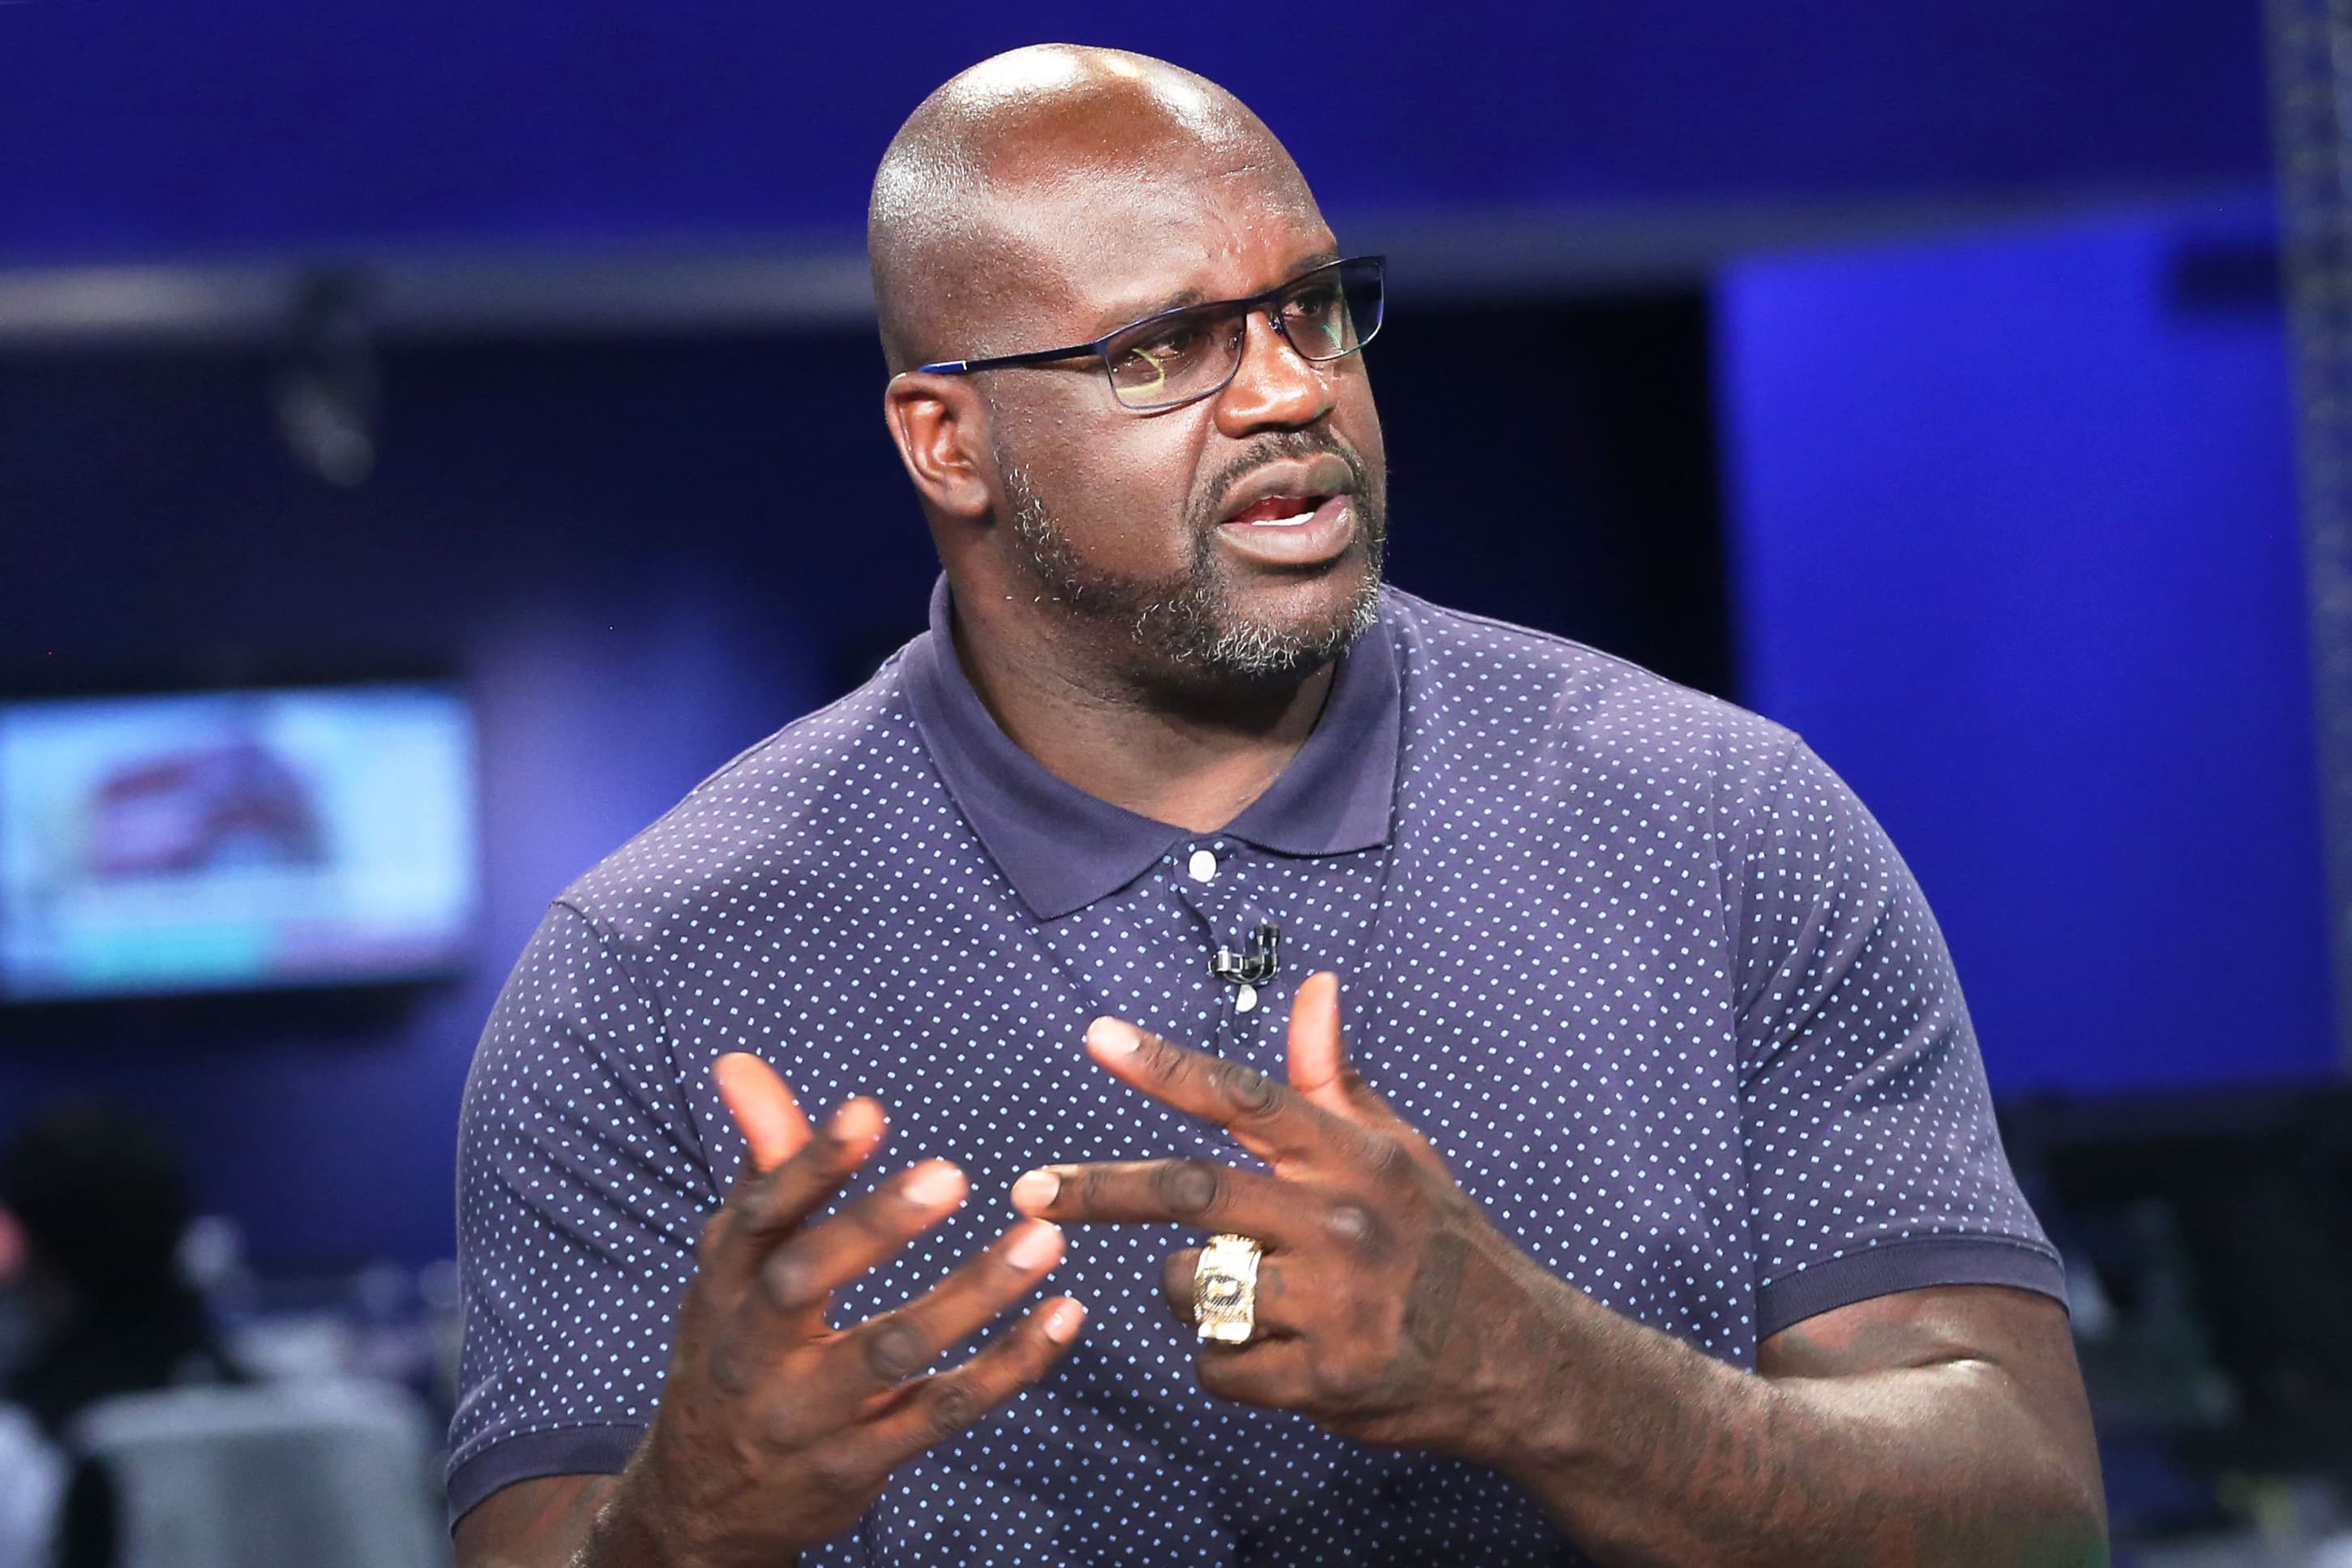 NBA legend Shaquille O’Neal says without Lebron James, the Lakers will never win again